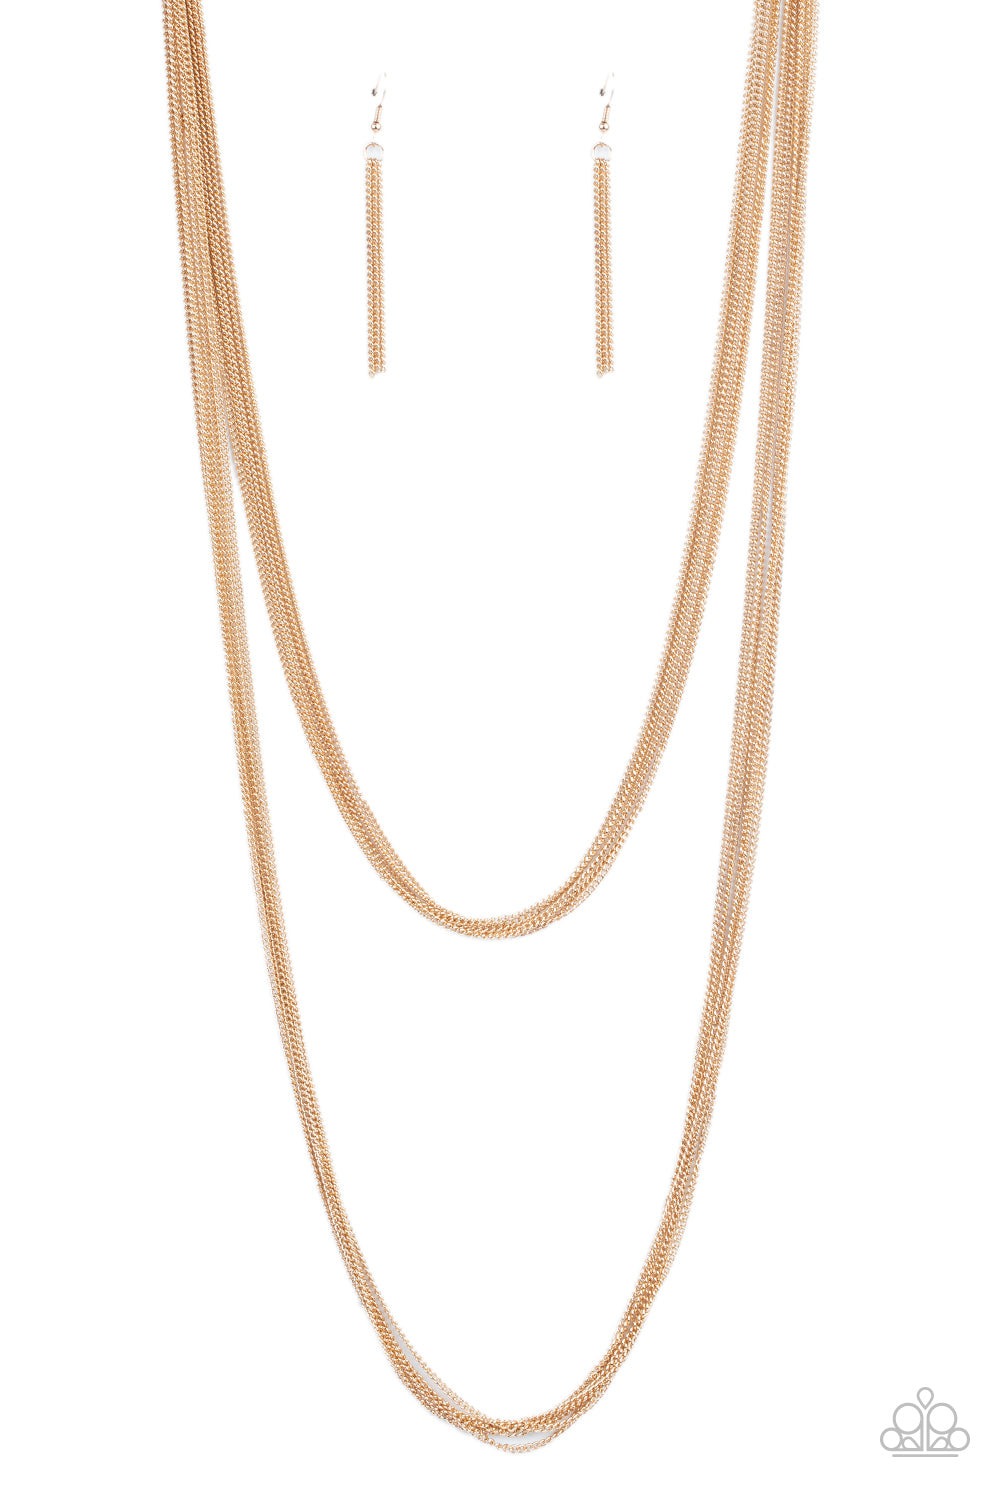 Paparazzi Accessories Save Your TIERS - Gold Necklaces - Lady T Accessories